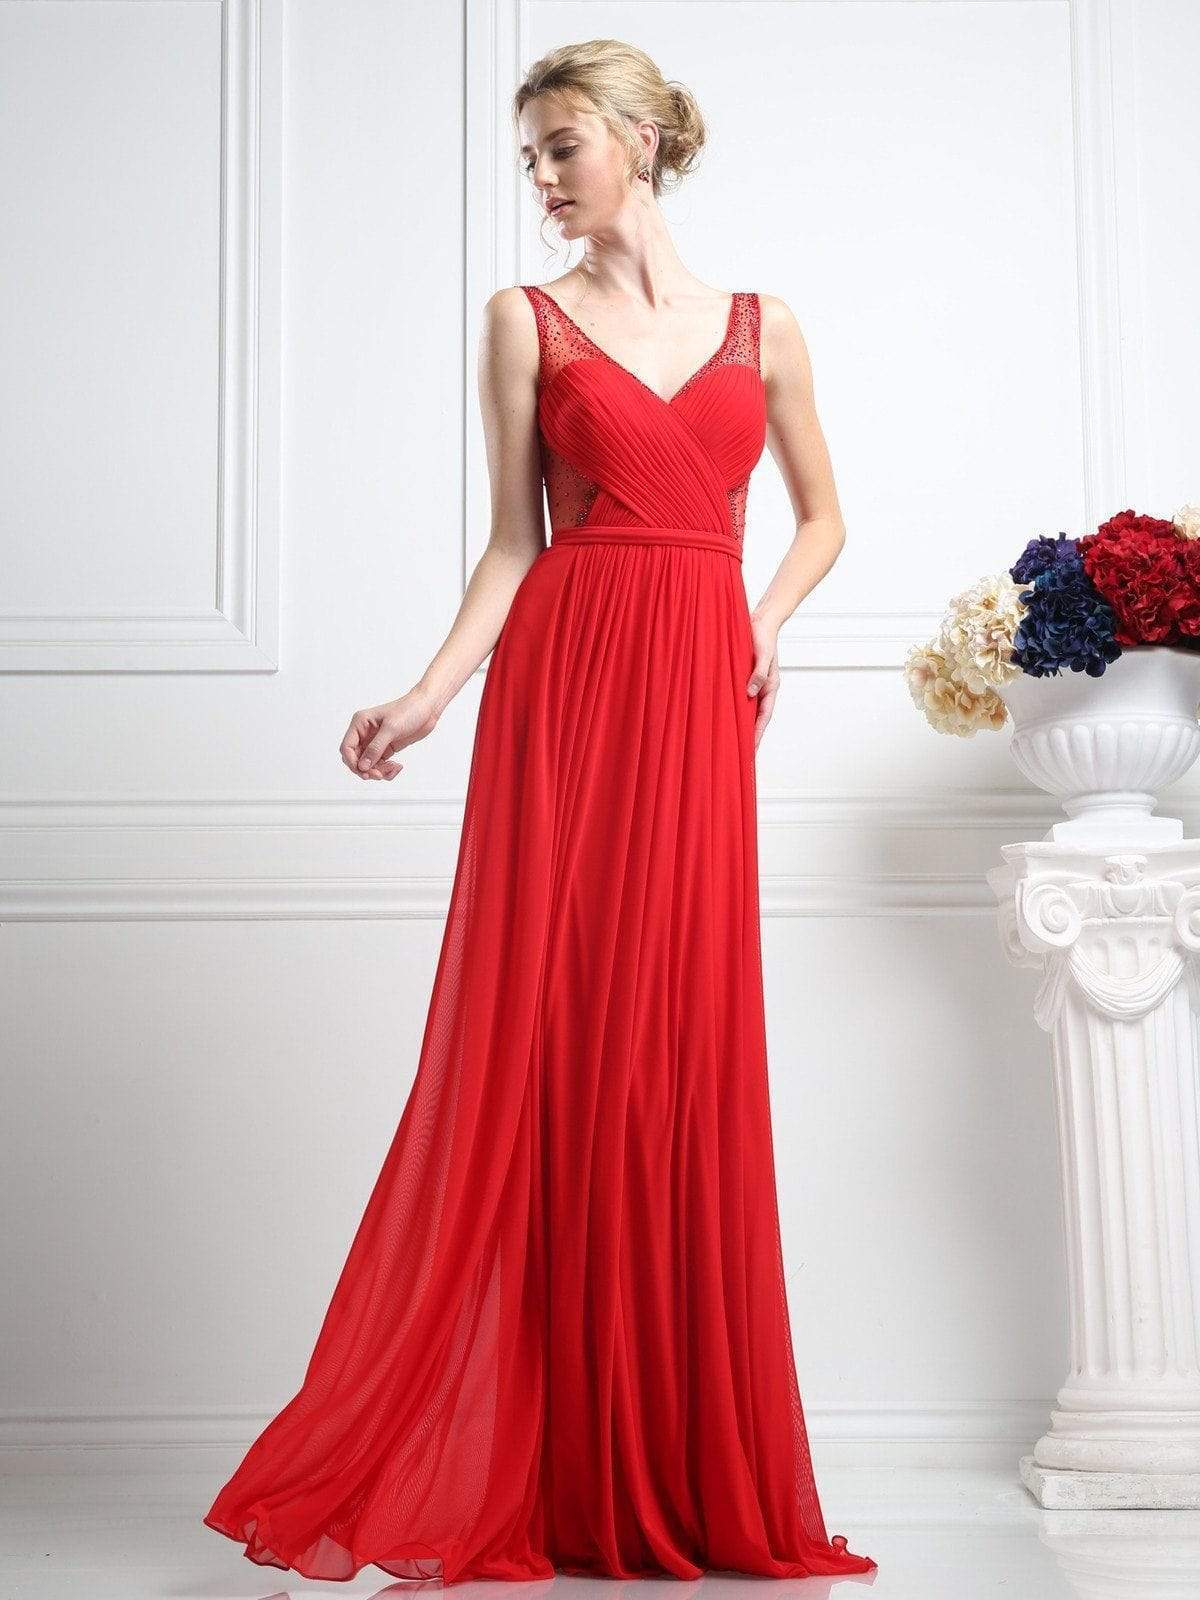 Cinderella Divine - Crisscrossed Ornate Illusion Panel Gown Special Occasion Dress 2 / Red